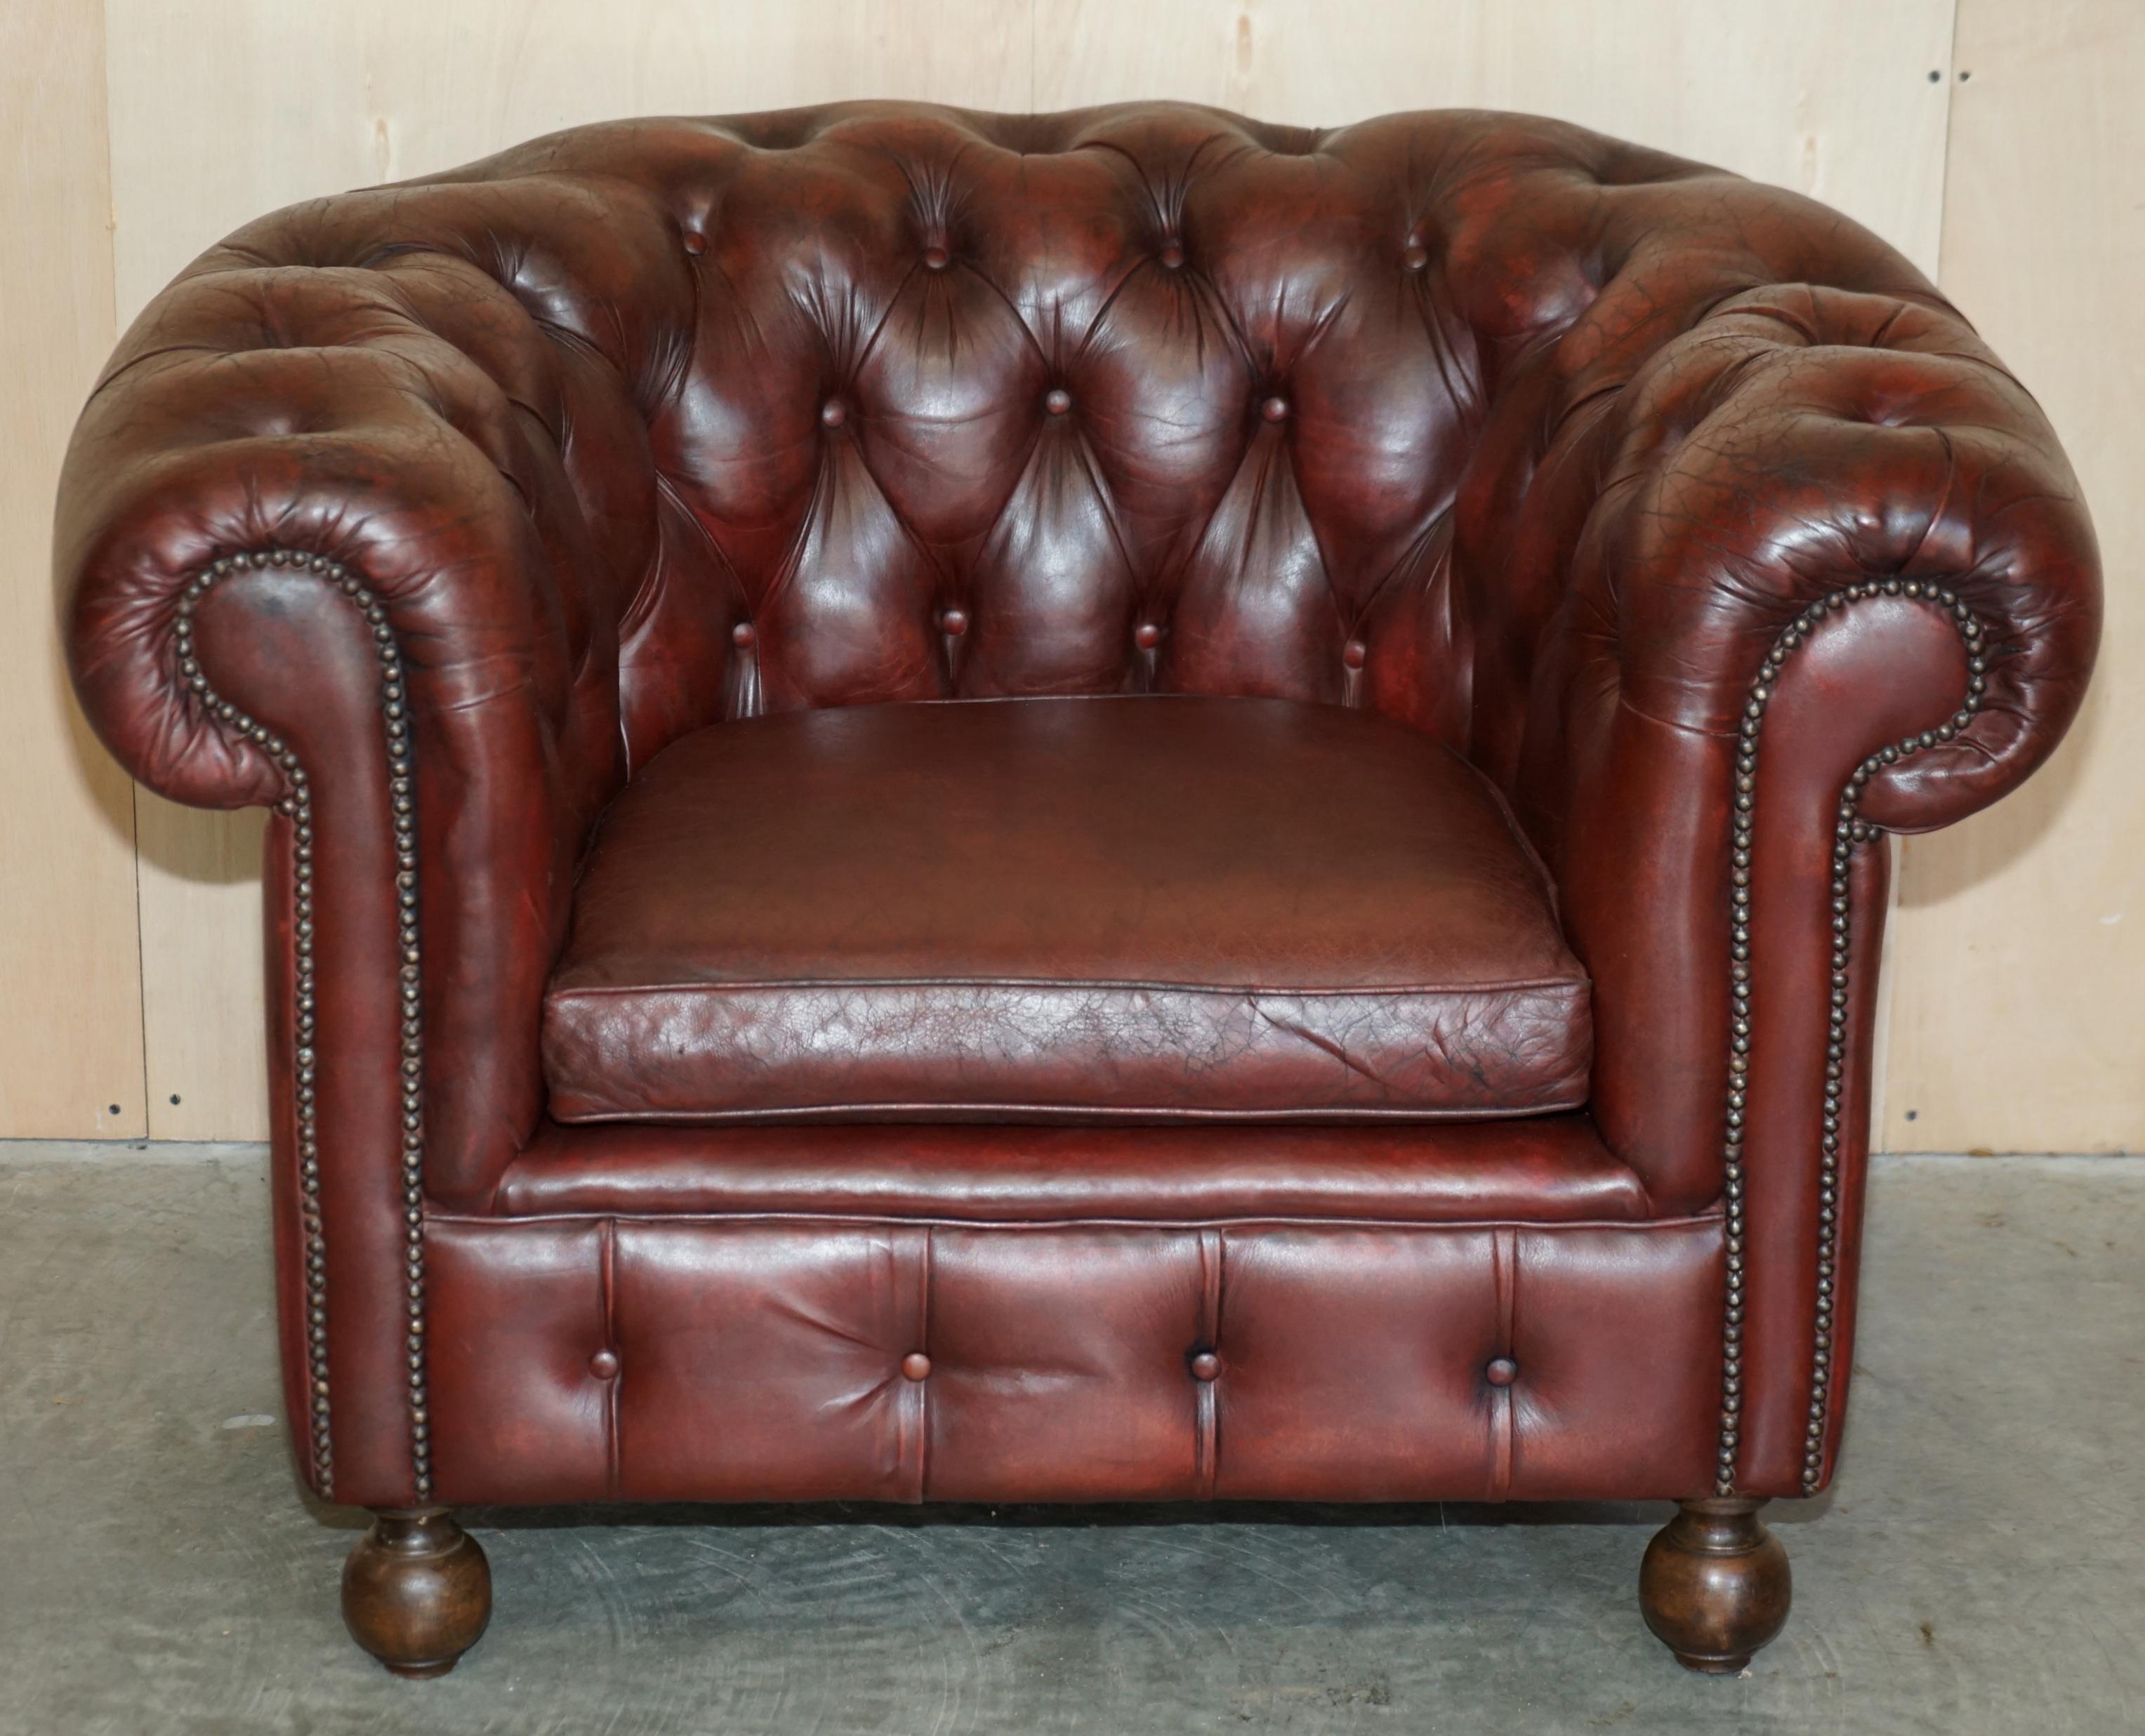 Edwardian PAIR OF LOVELY ANTIQUE OXBLOOD LEATHER CHESTERFIELD GENTLEMAN'S CLUB ARMCHAiRS For Sale